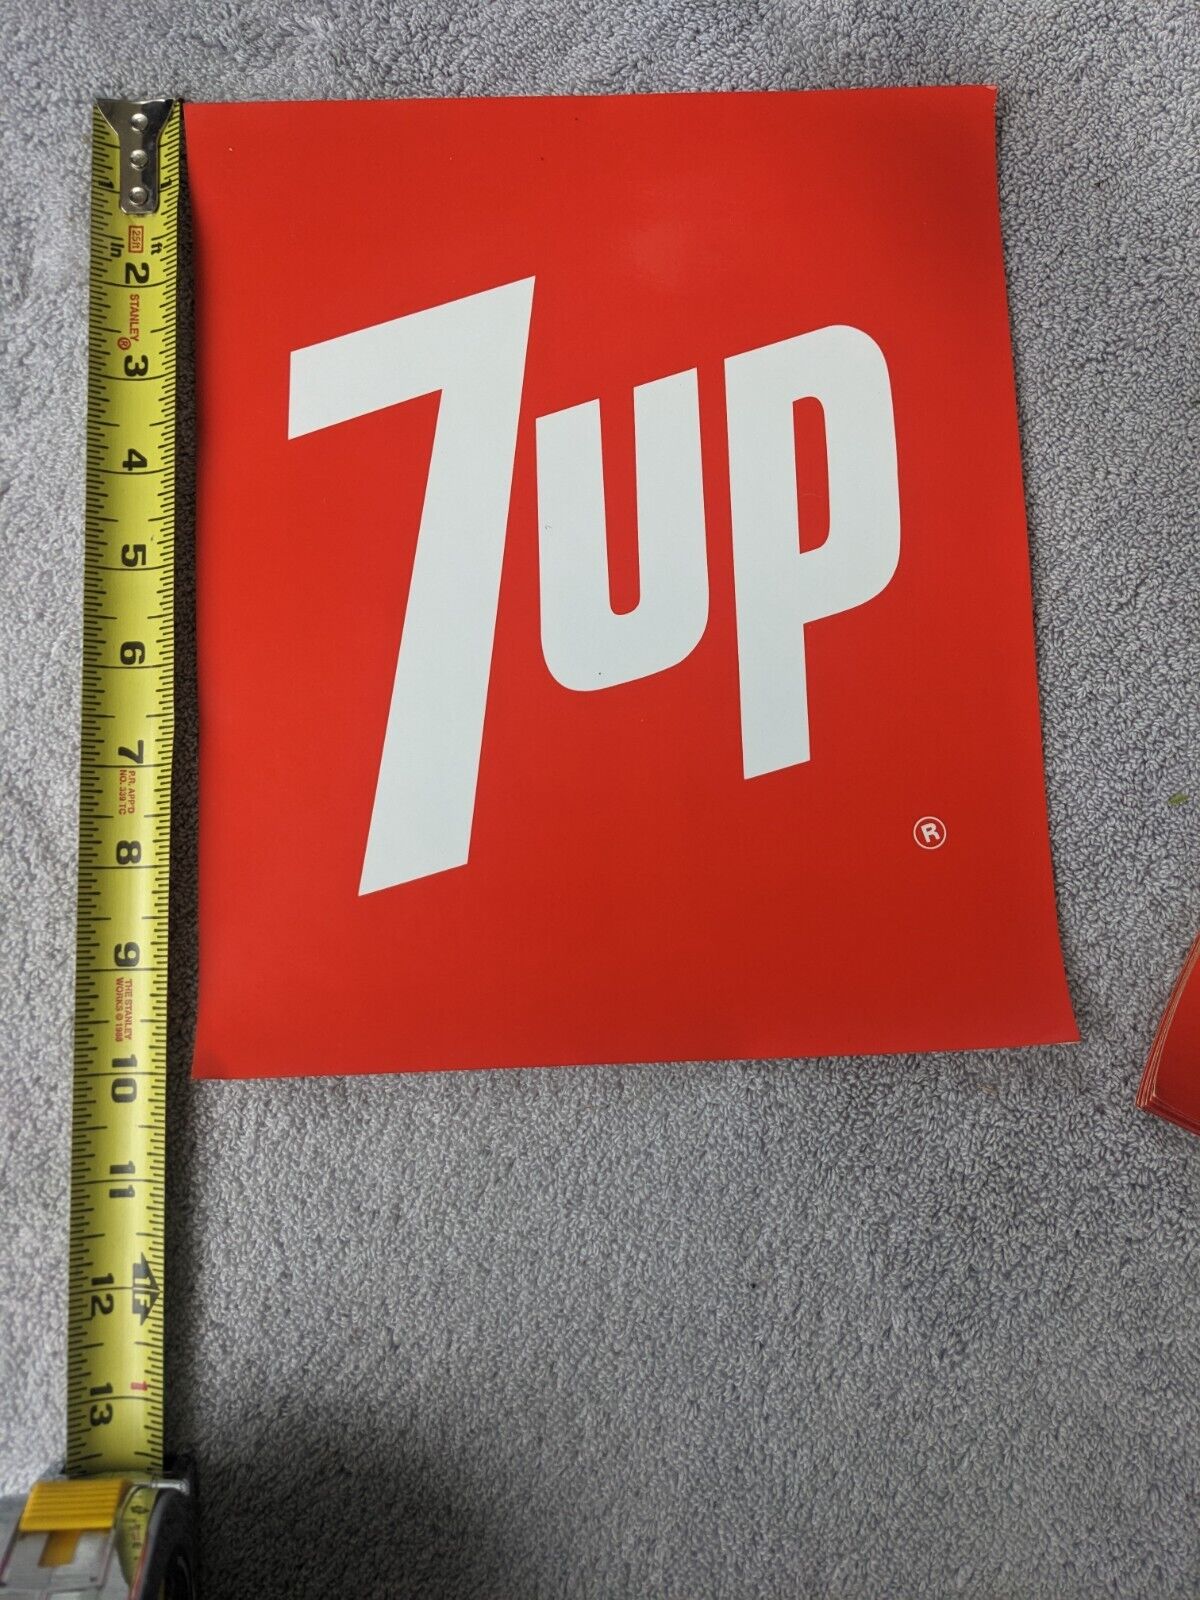 Vintage 7-UP 7up sticker decal 10 x 8 Inch collectible soda